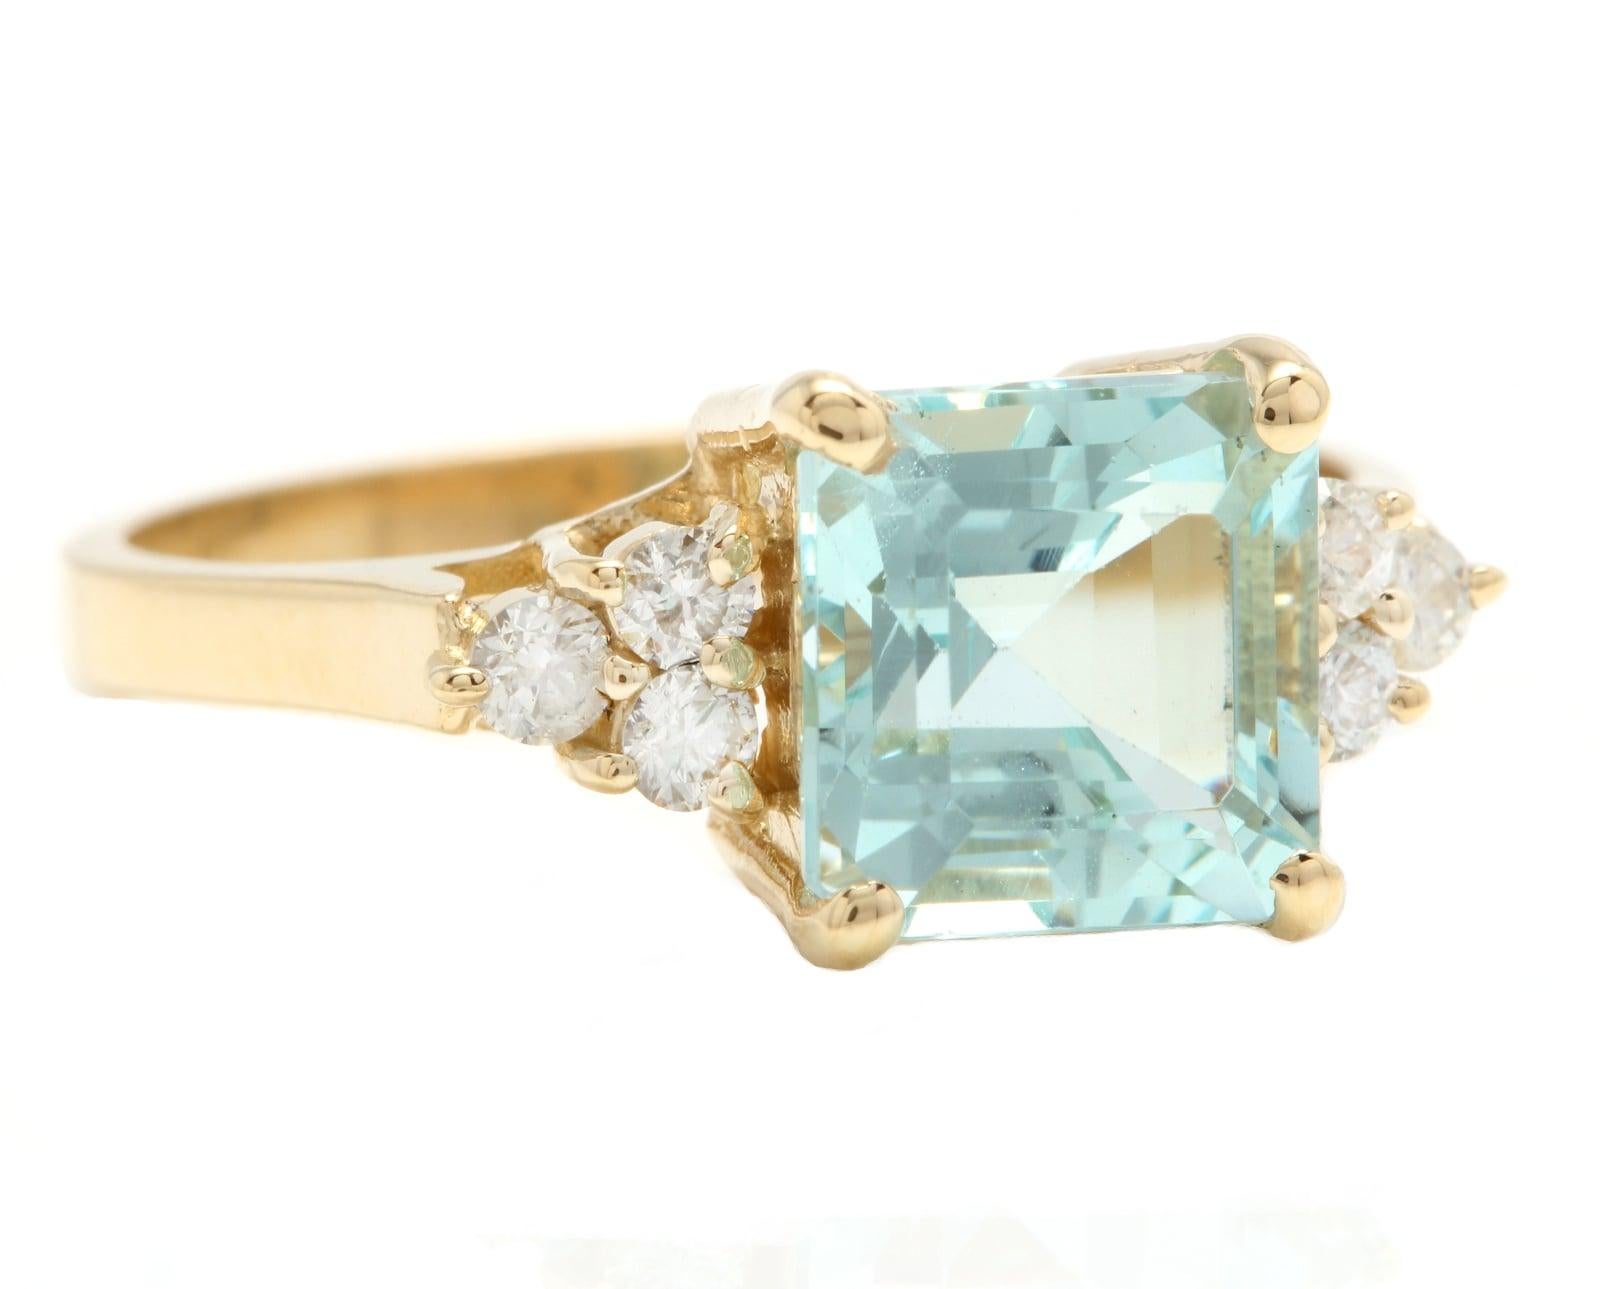 2.75 Carats Impressive Natural Aquamarine and Diamond 14K Yellow Gold Ring

Suggested Replacement Value: Approx. $3,800.00

Total Natural Square Cut Aquamarine Weight is: Approx. 2.50 Carats

Aquamarine Measures: Approx. 7.80 x 7.80mm

Natural Round